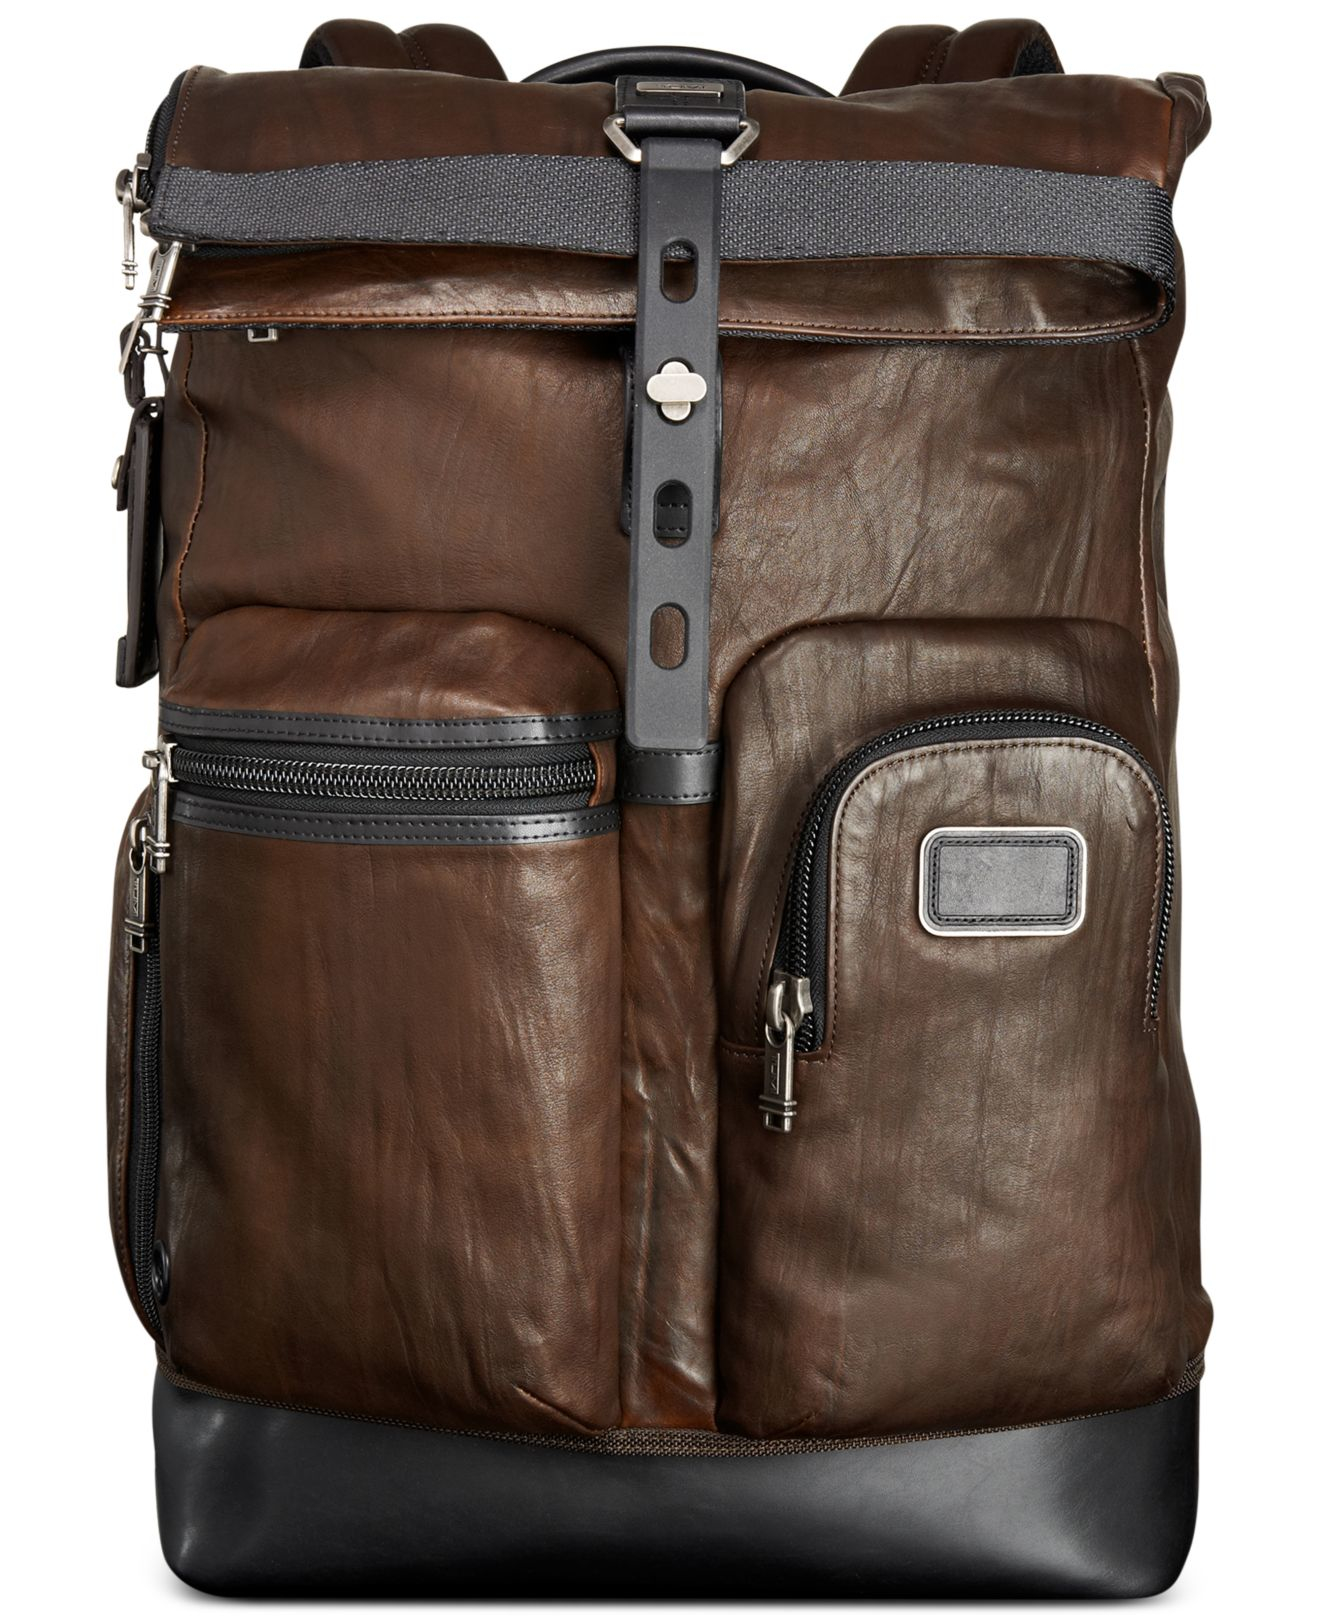 Lyst - Tumi Alpha Bravo Luke Roll-top Leather Backpack in Brown for Men